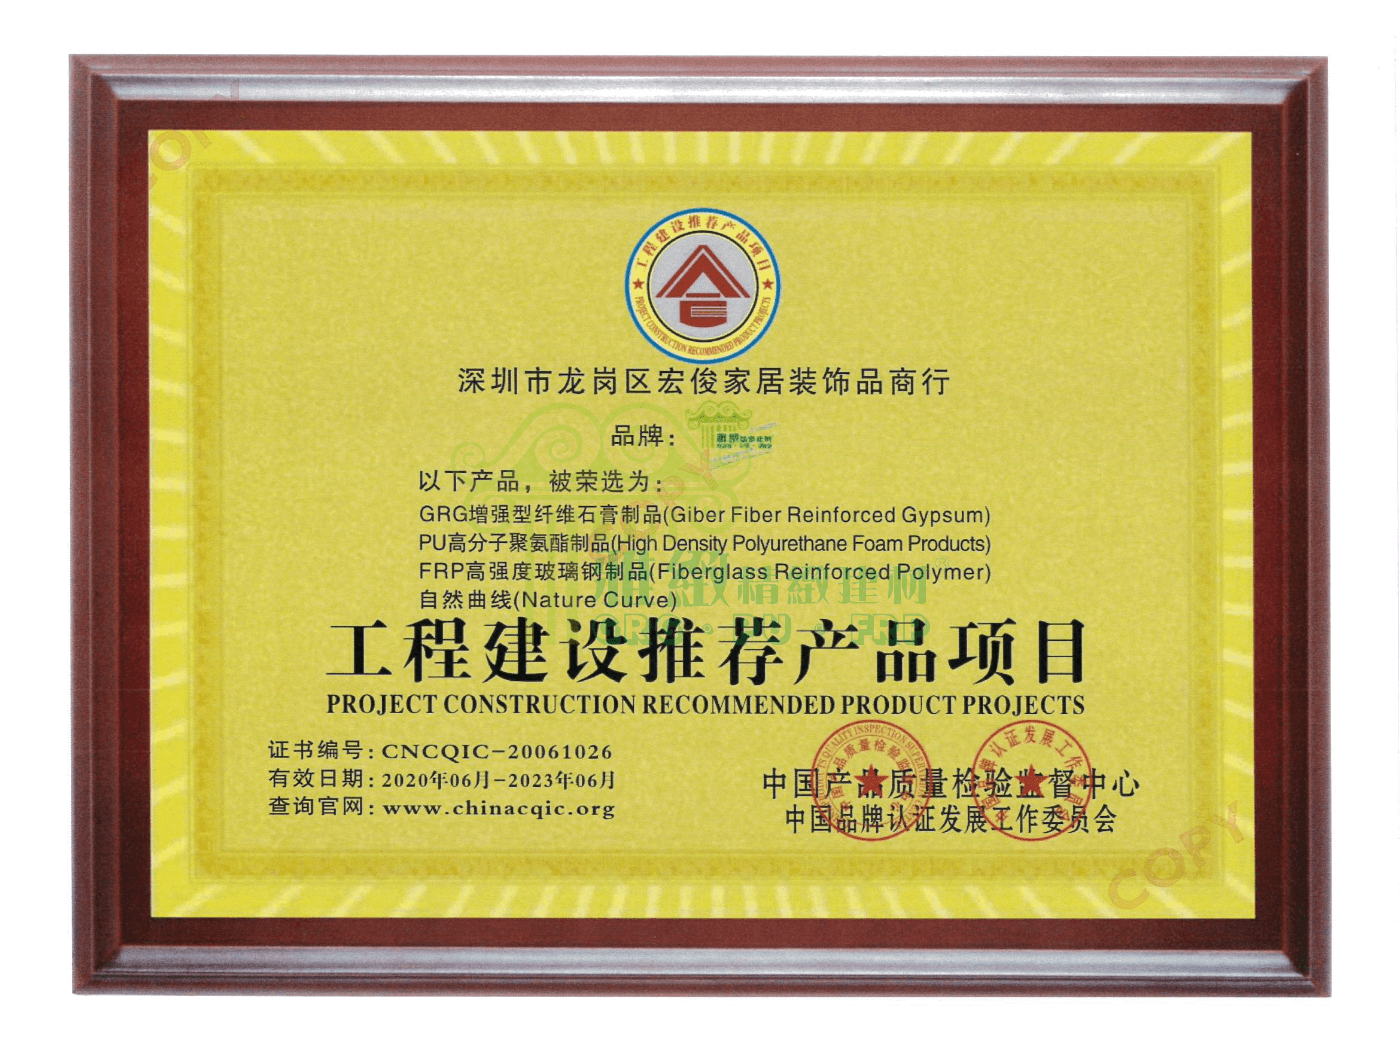 Project construction recommended product certificate